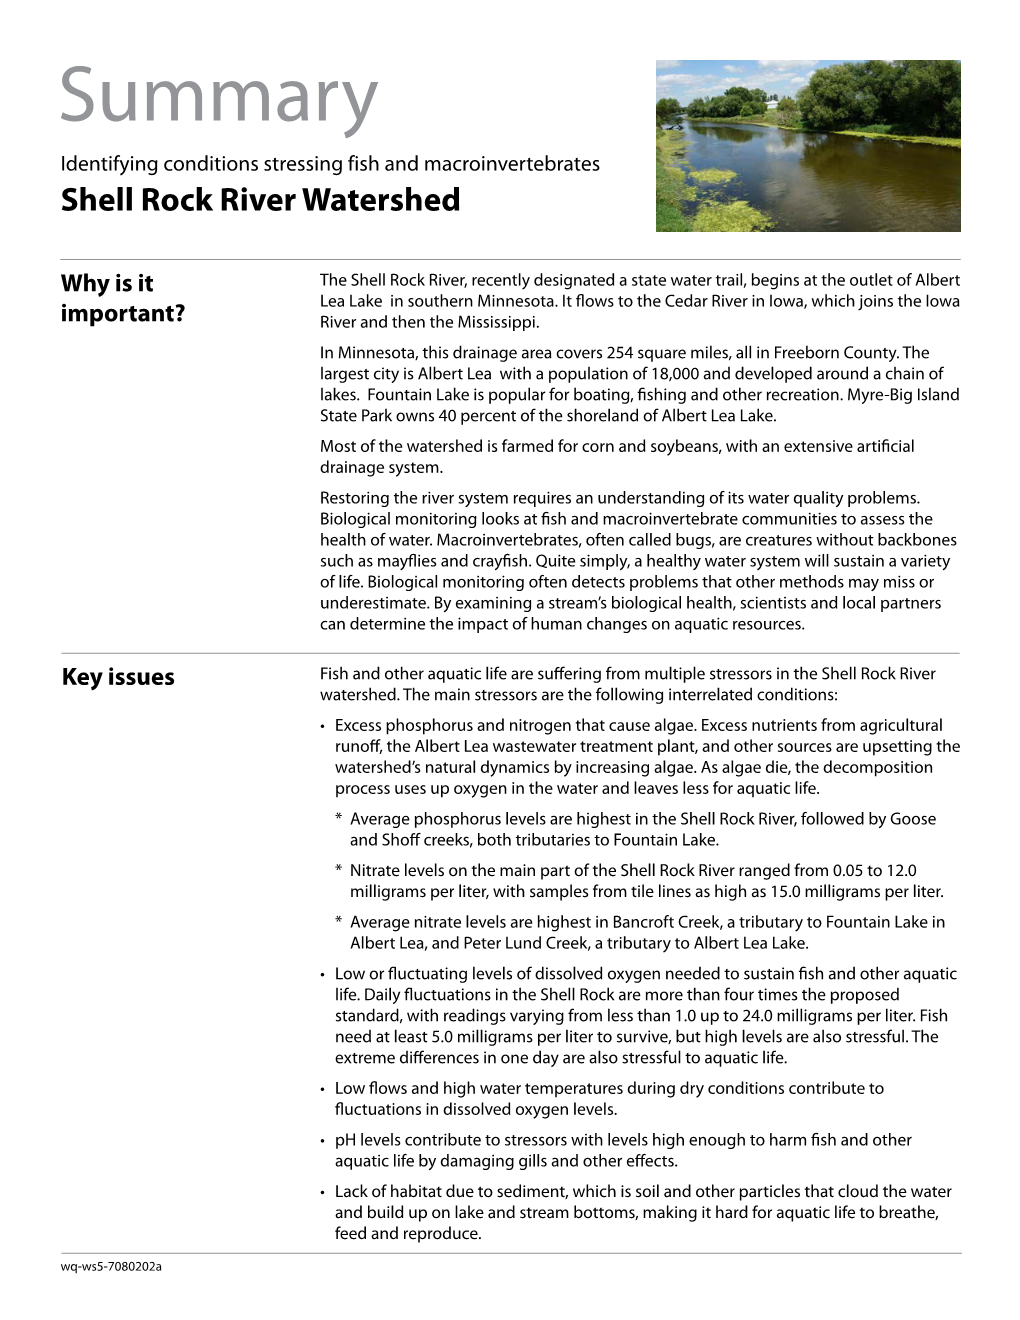 Shell Rock River Watershed